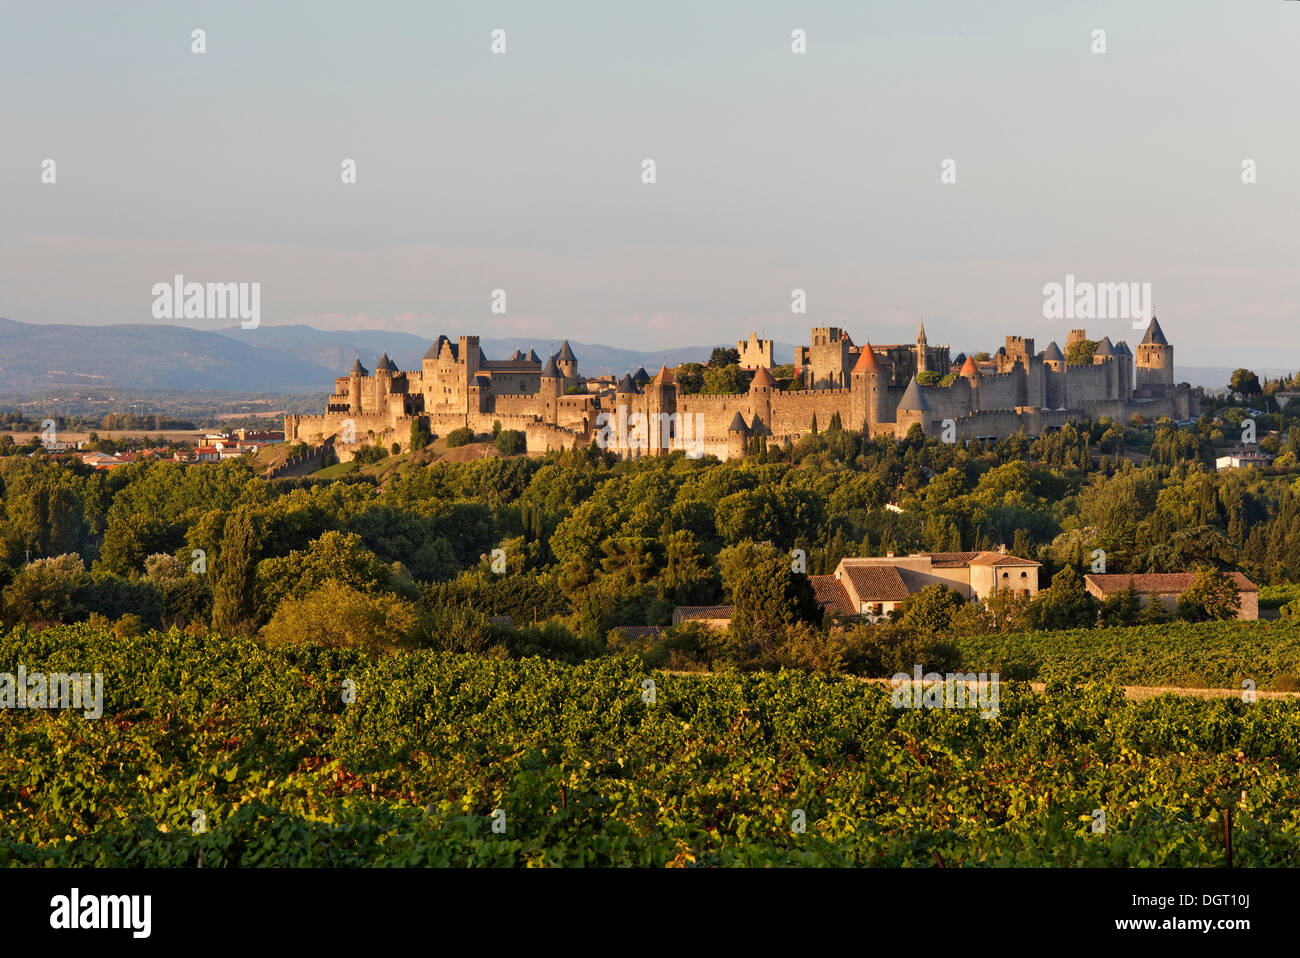 Carcassonne in the evening light, Languedoc-Roussillon region, department of Aude, France, Europe Stock Photo